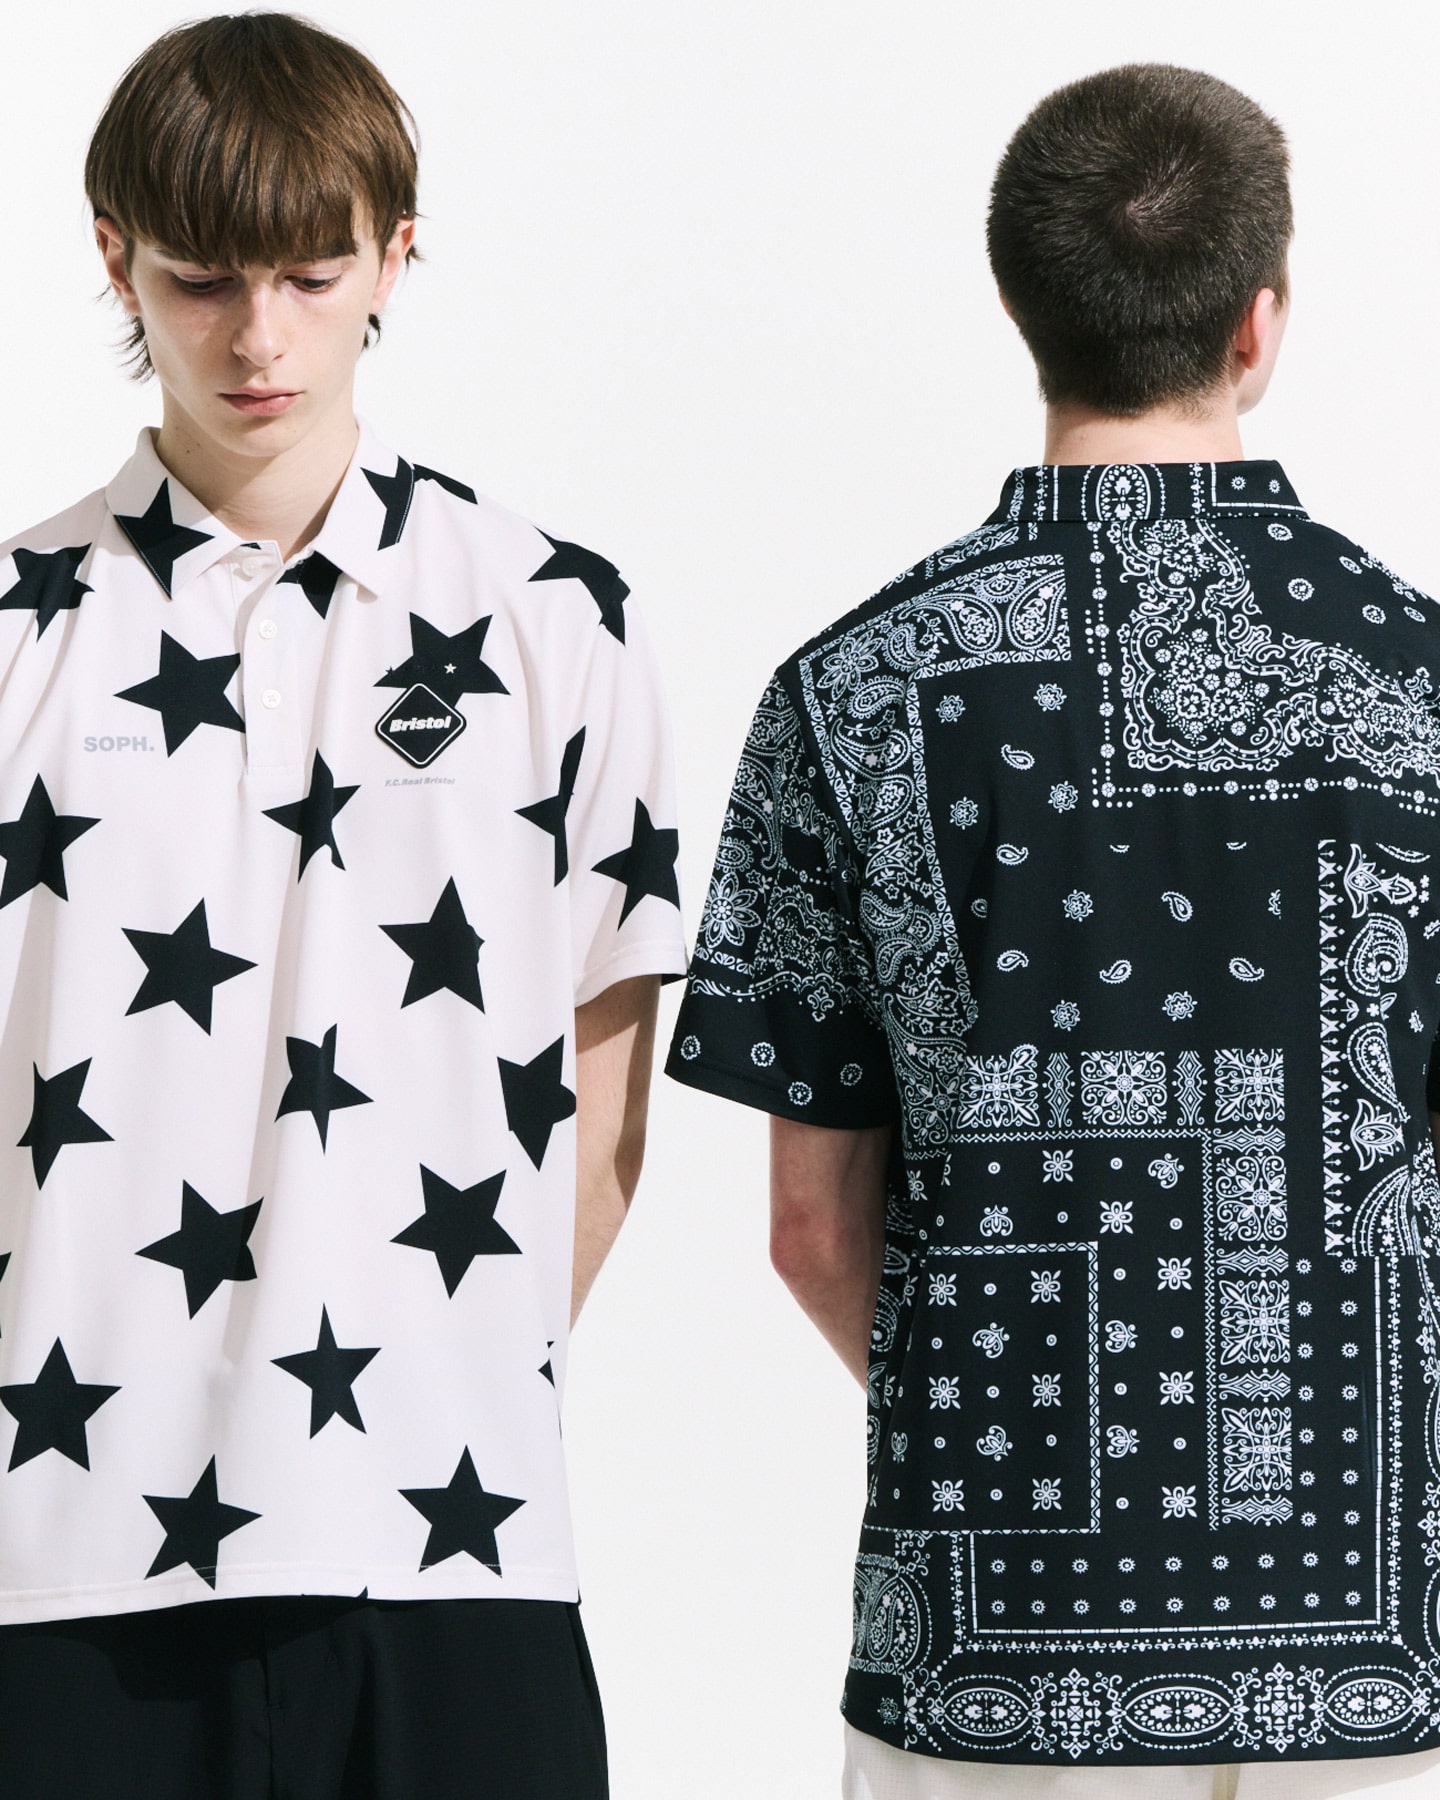 SOPH. | WHOLE PATTERN S/S POLO(M OFF WHITE (STAR)):